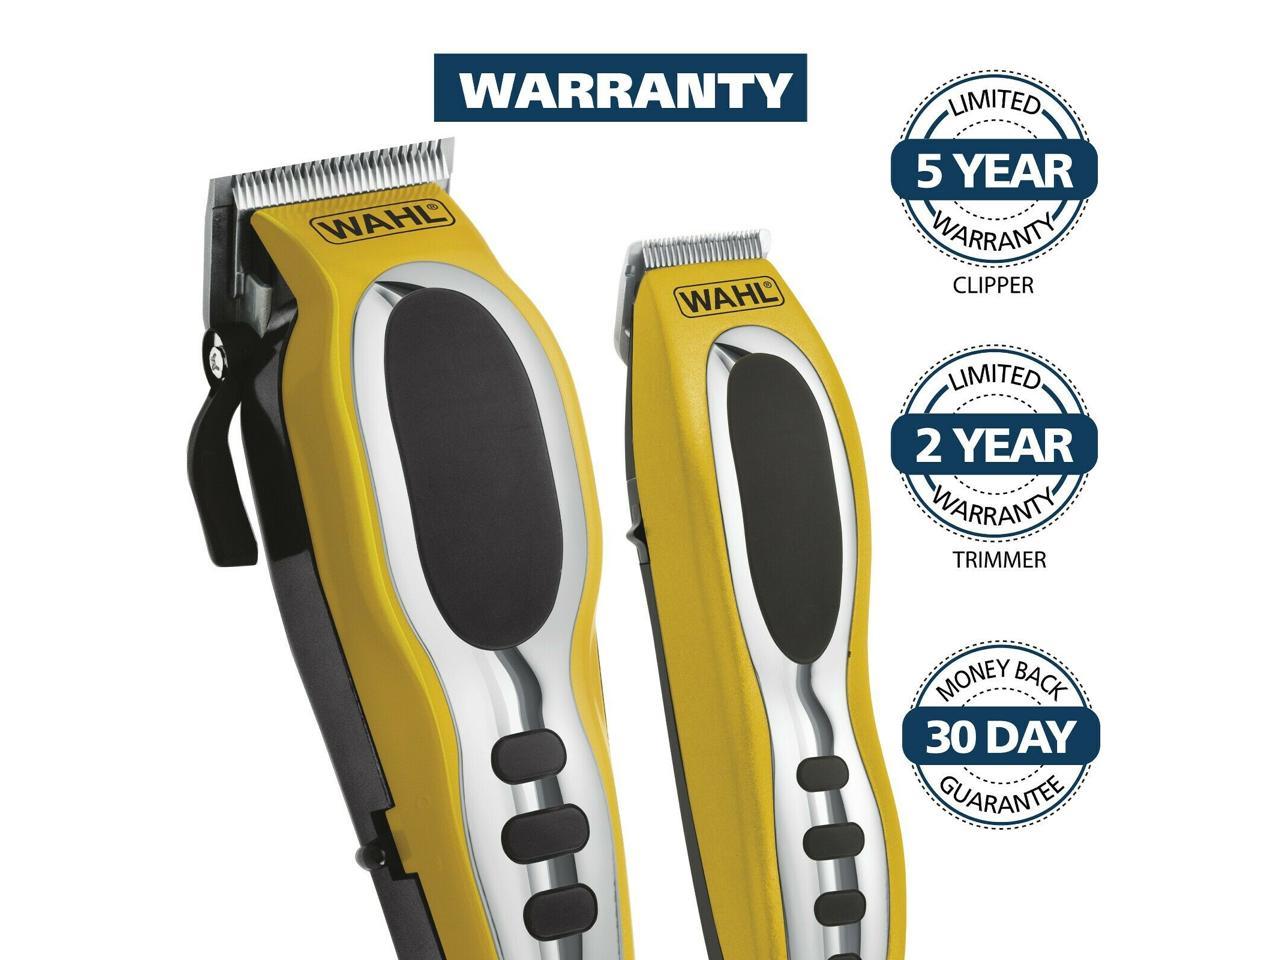 wahl complete haircutting kit yellow